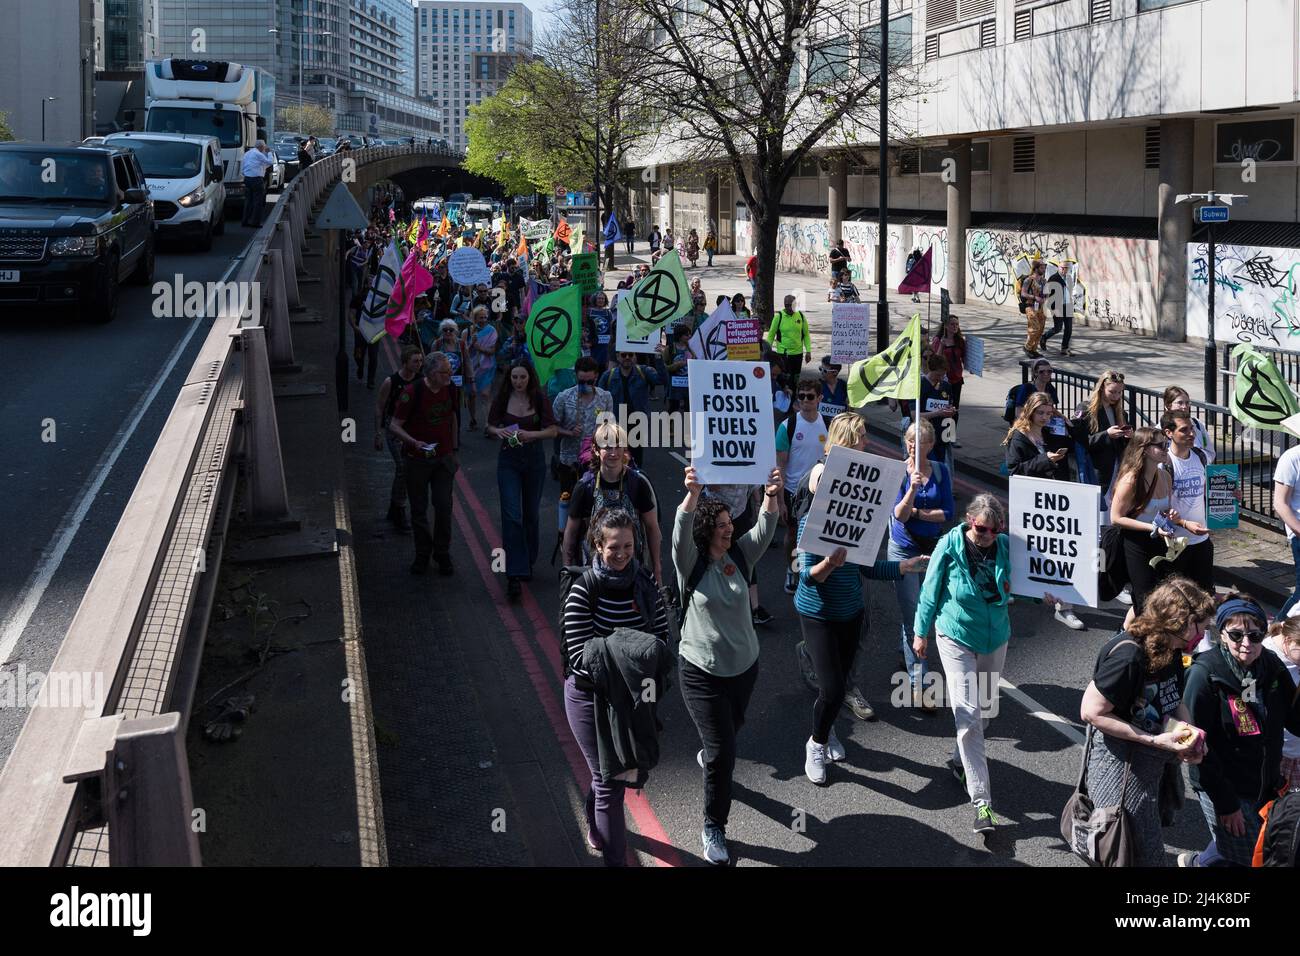 London, UK. 16th April, 2022. Activists from Extinction Rebellion stop the traffic on the Marylebone Flyover on the eight day of protests and civil disobedience actions to demand an immediate stop to all new fossil fuel infrastructure by the British government amid climate crisis and ecological emergency. Credit: Wiktor Szymanowicz/Alamy Live News Stock Photo